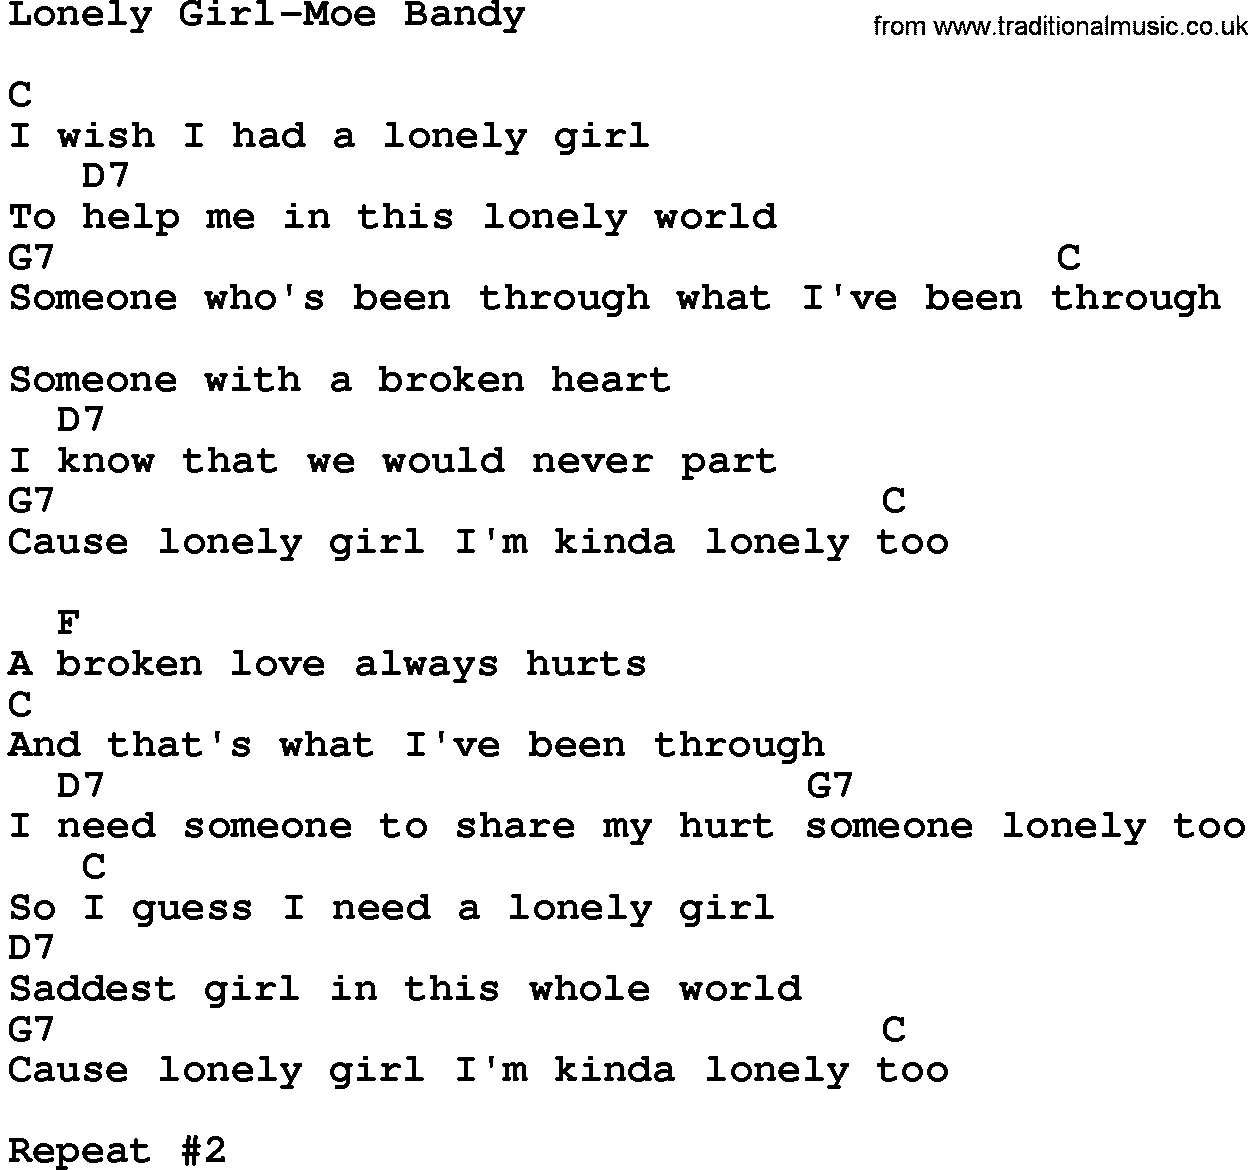 Country music song: Lonely Girl-Moe Bandy lyrics and chords